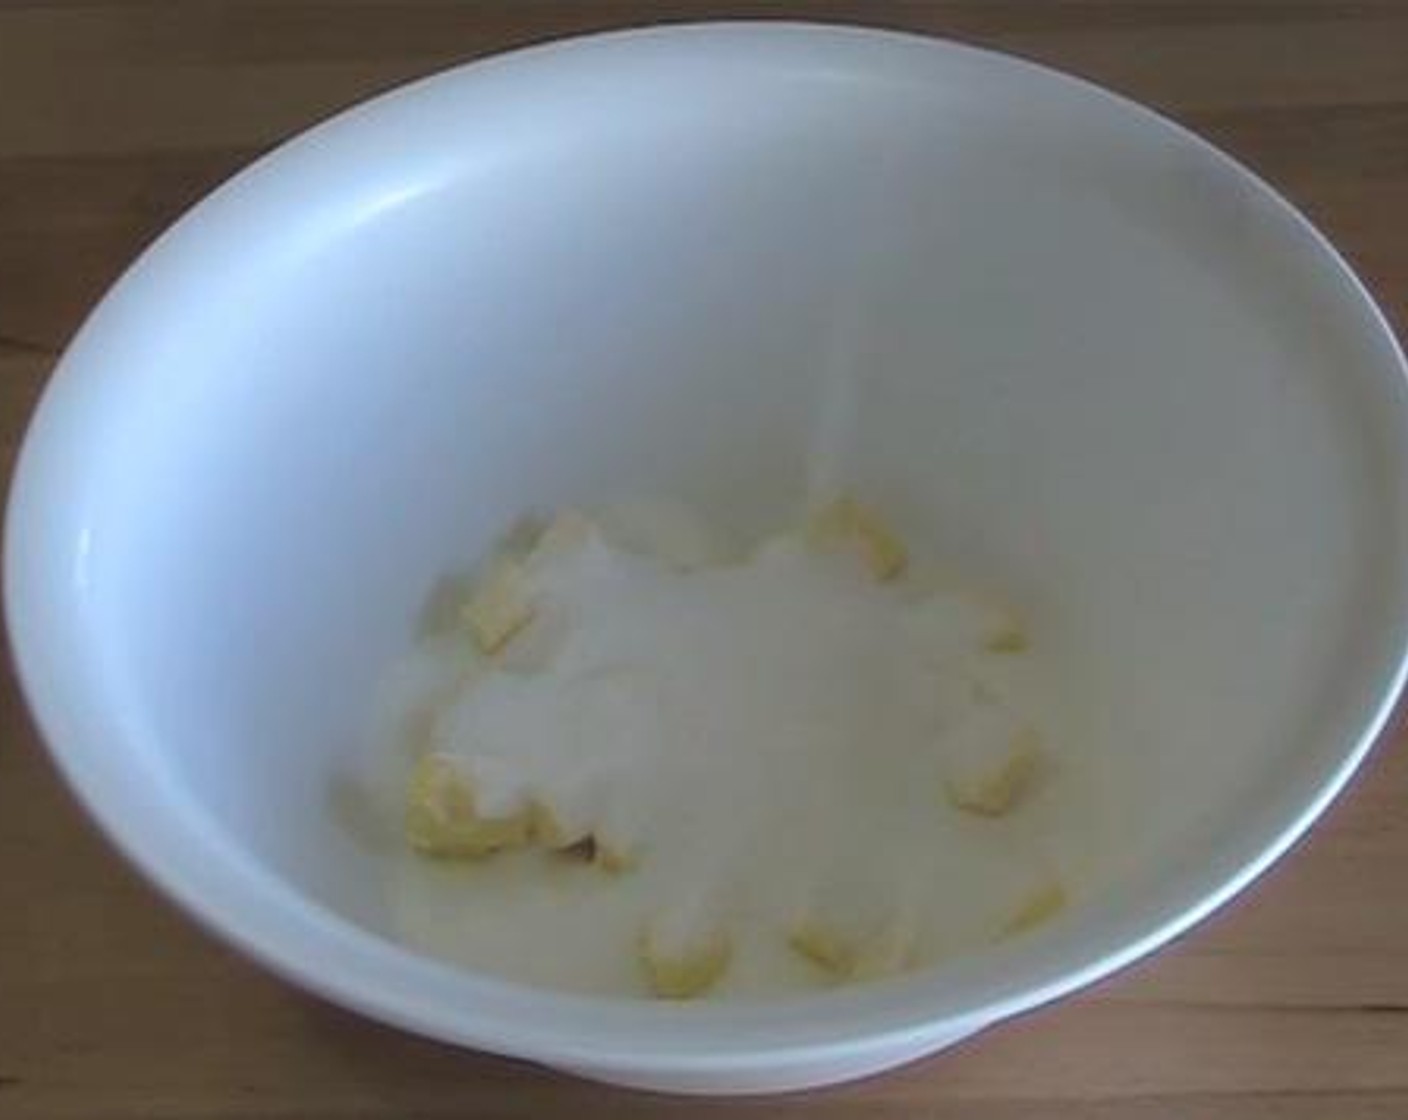 step 1 Into a mixing bowl, add and mix the Unsalted Butter (1 cup), Granulated Sugar (1 1/2 cups), and Salt (1 pinch).